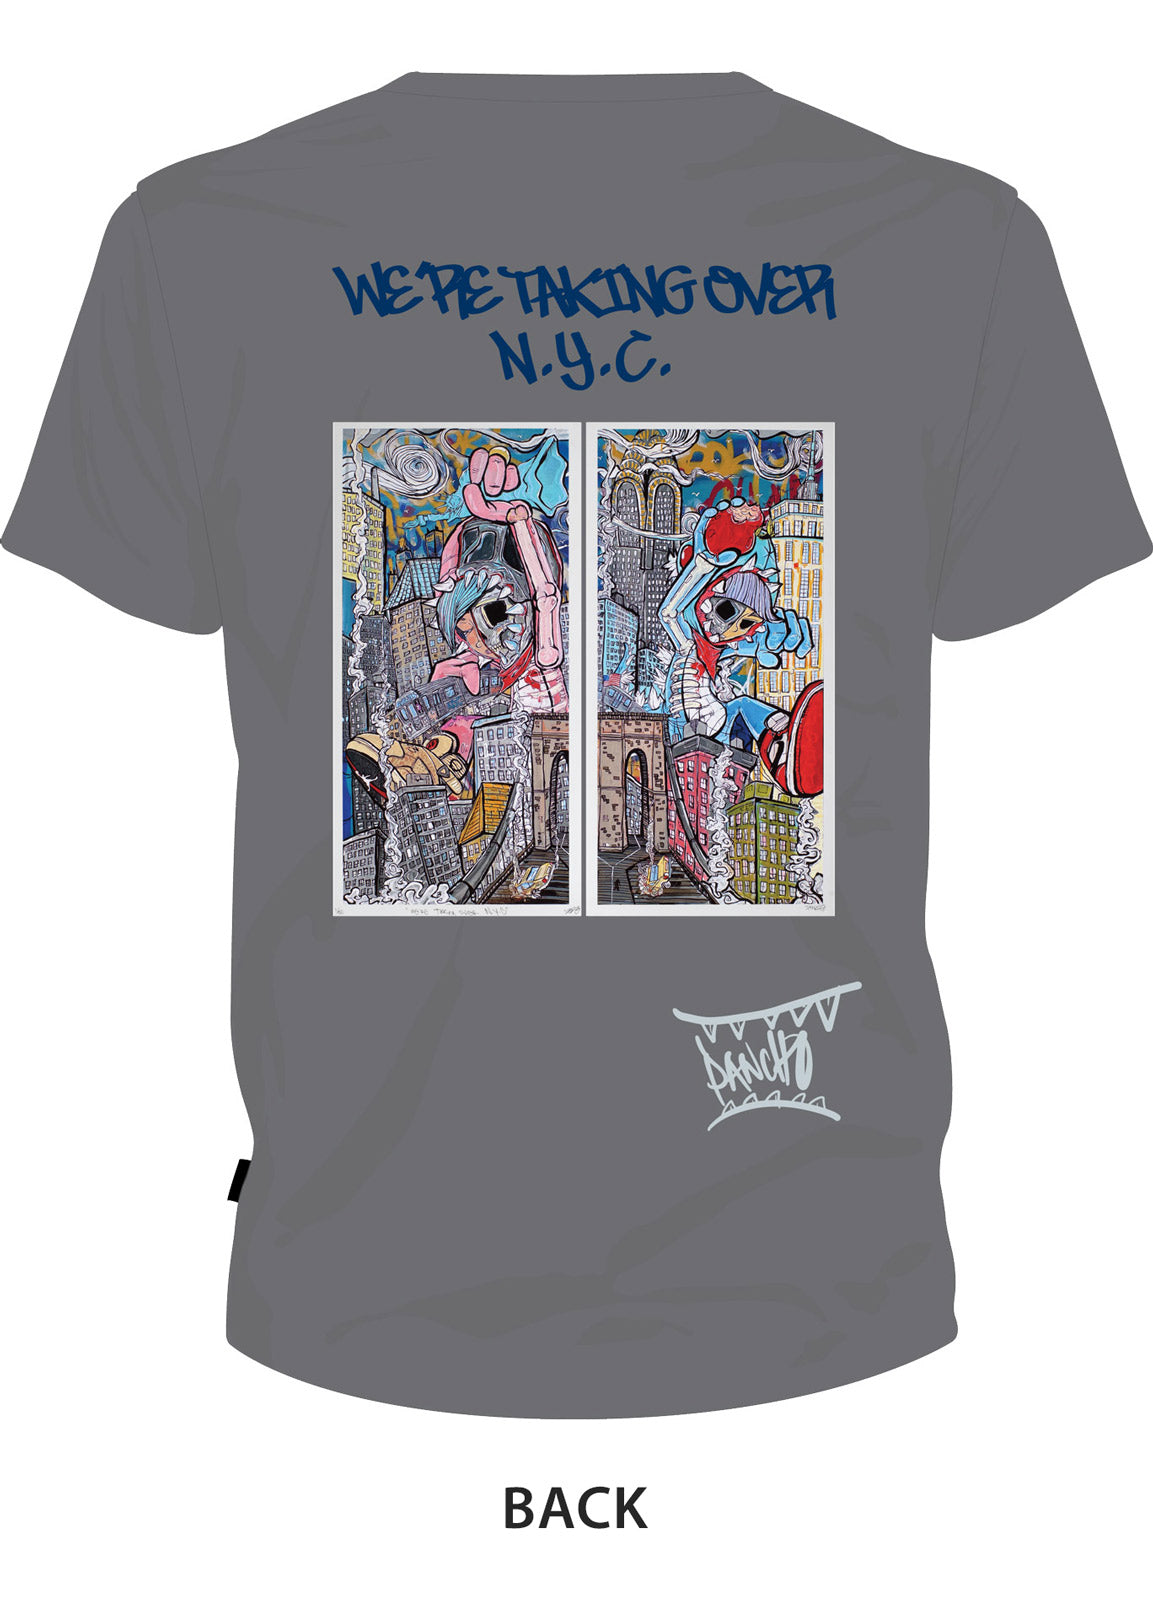 Limited Edition T-shirt: WE’RE TAKING OVER N.Y.C. (Pre-Order)